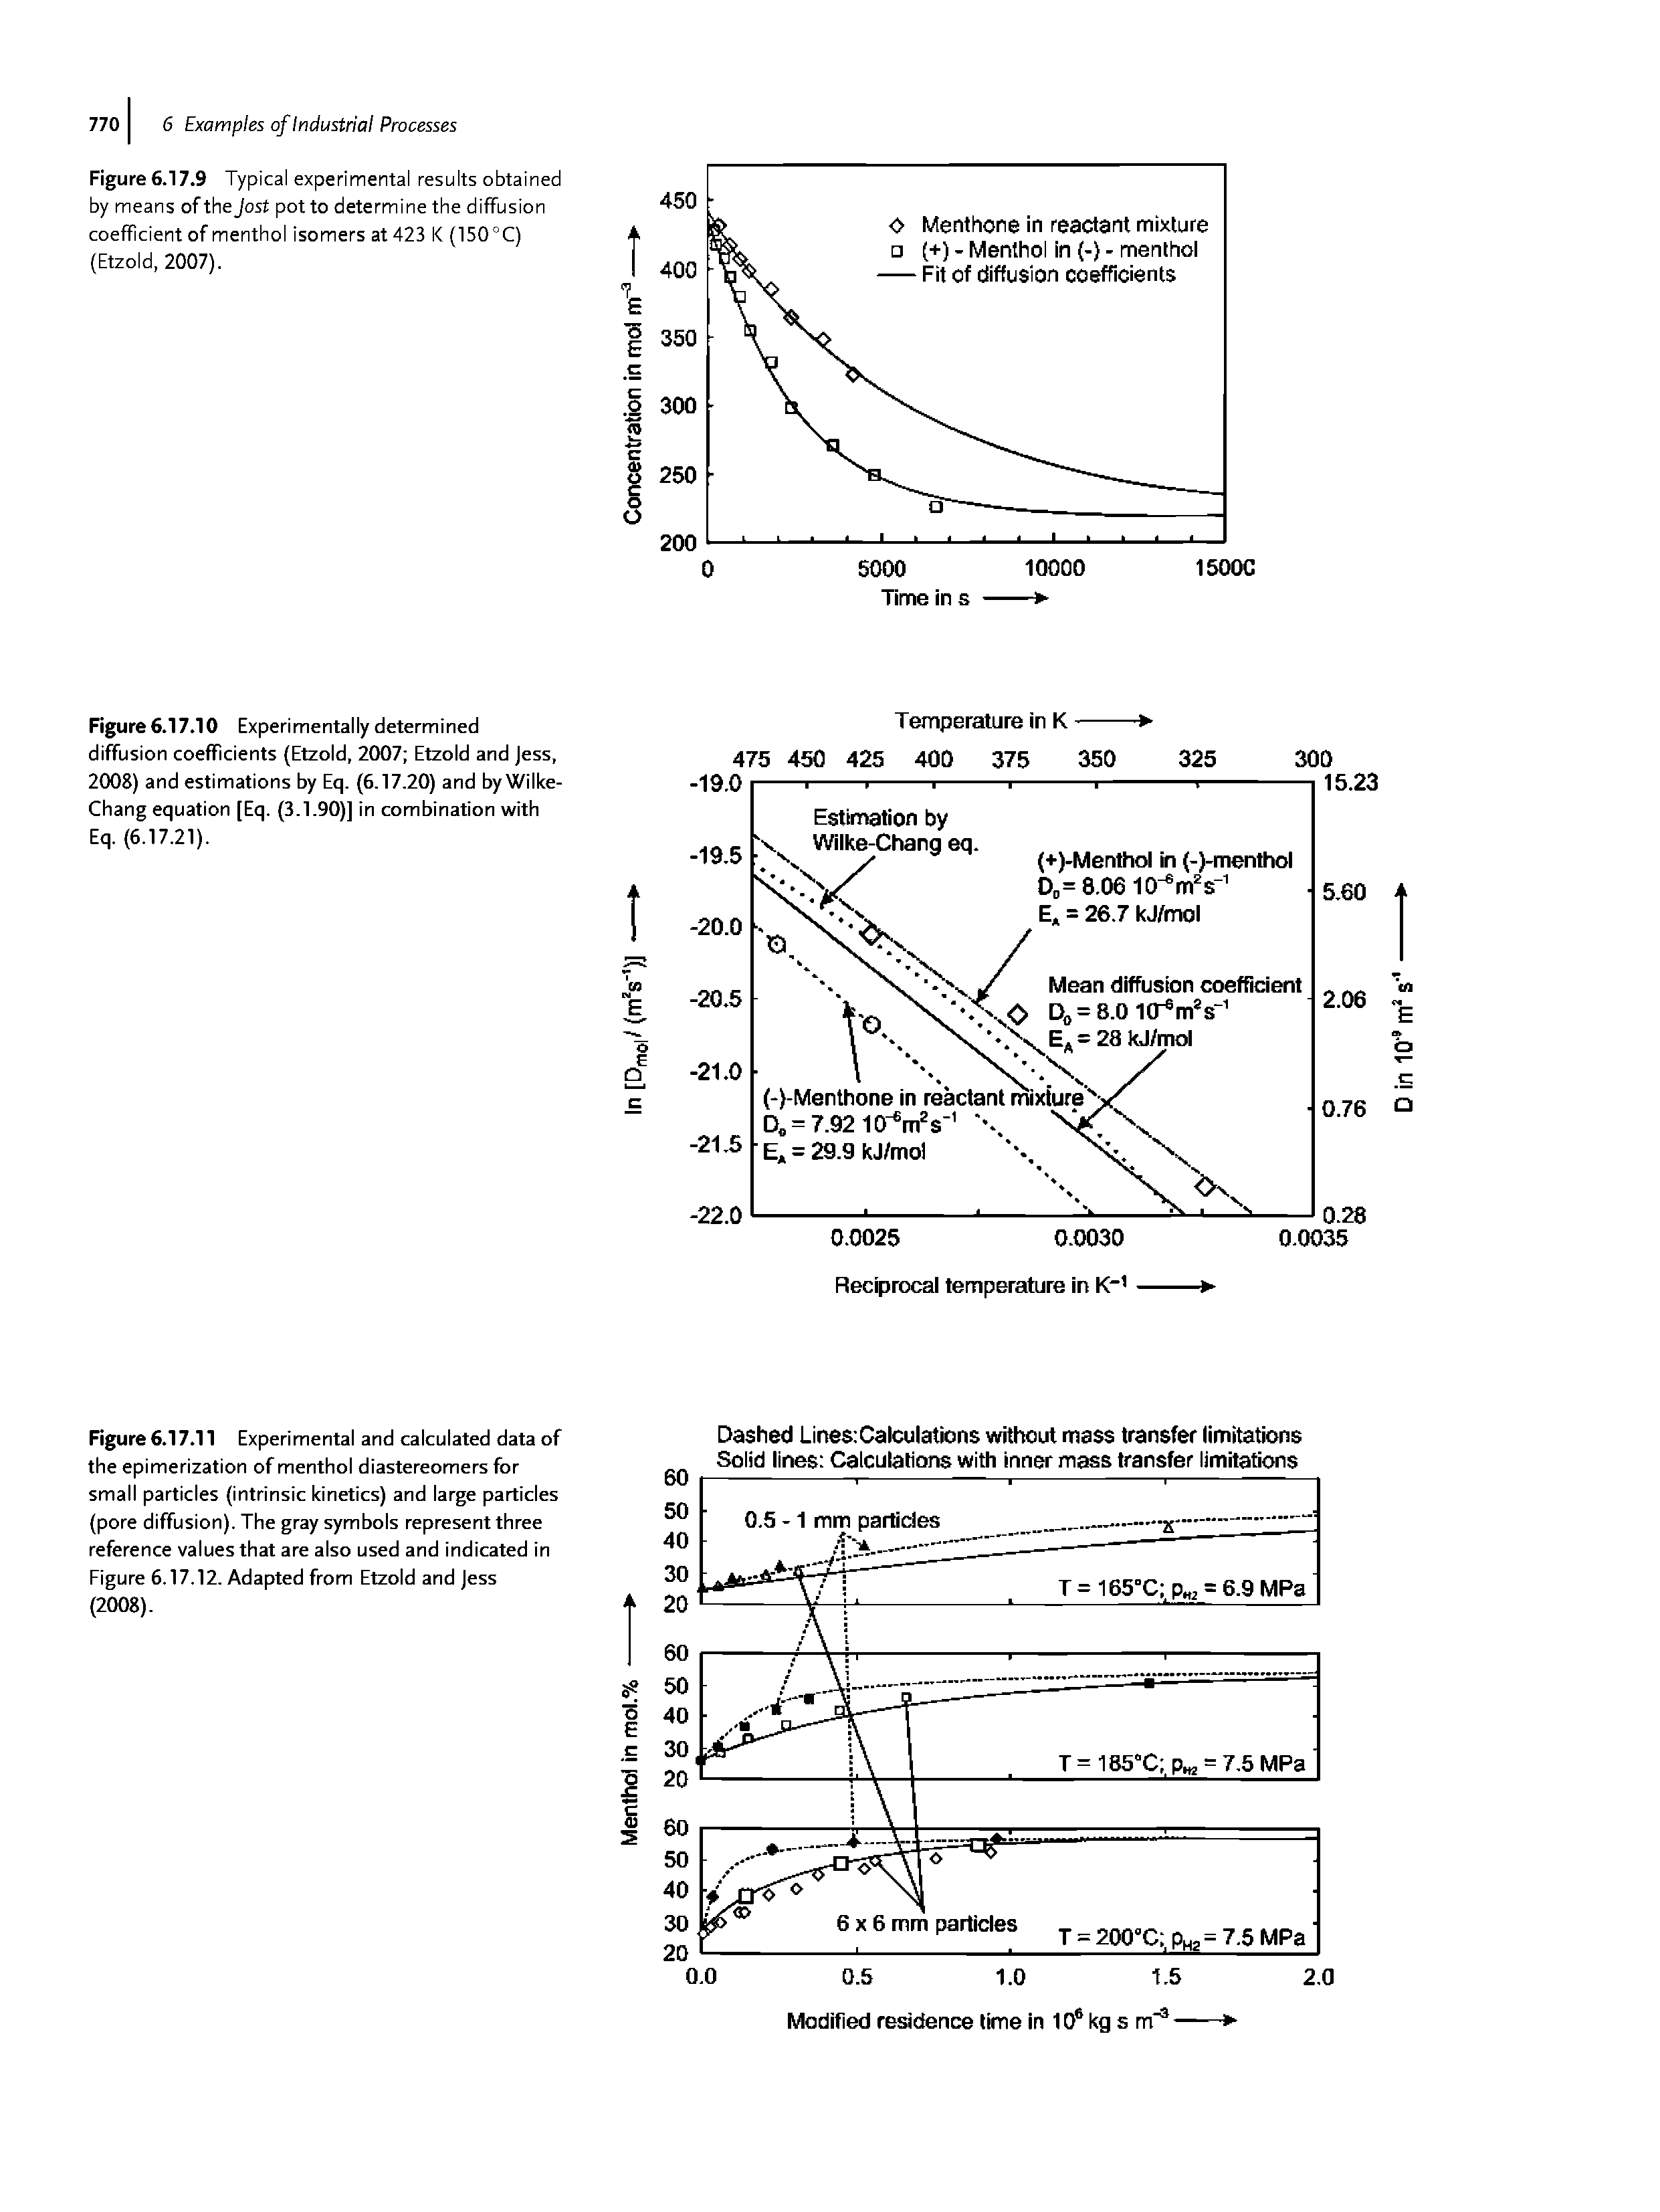 Figure 6.17.9 Typical experimental results obtained by means of the Jost potto determine the diffusion coefficient of menthol isomers at 423 l< (150°C) (Etzold, 2007).